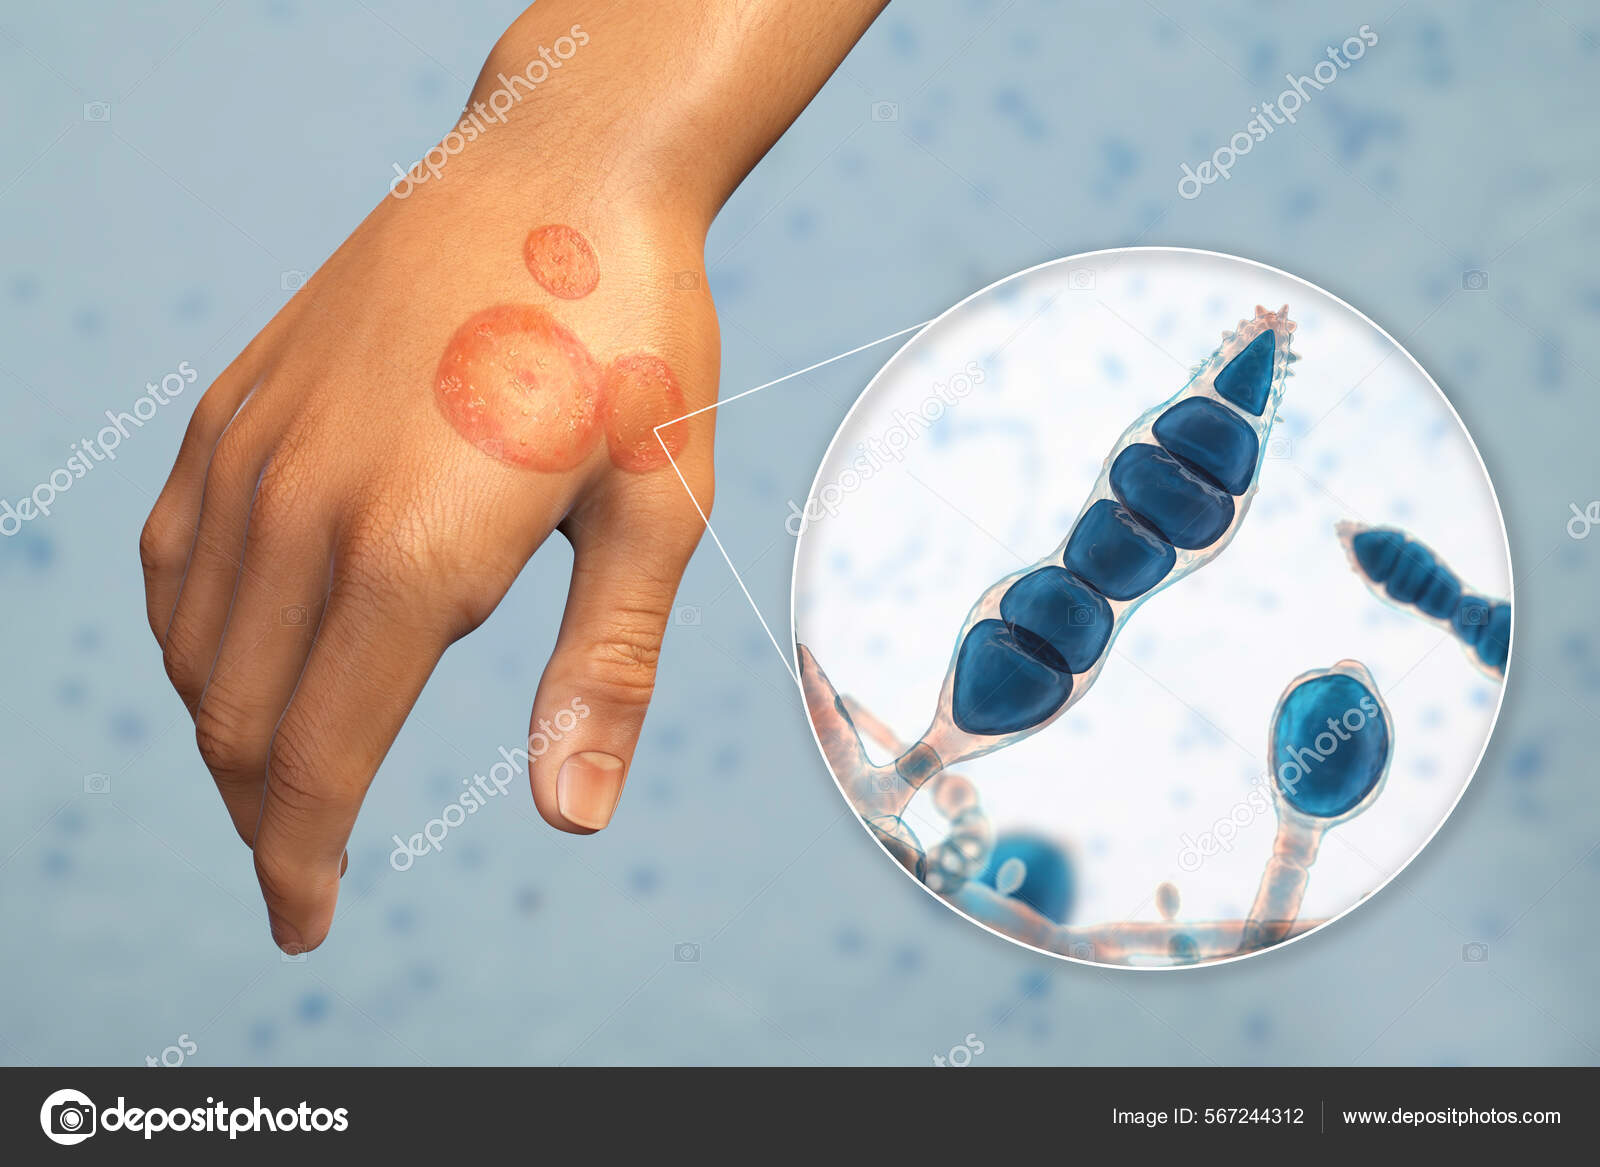 Fungal Infection Man's Hand Tinea Manuum Close View Dermatophyte